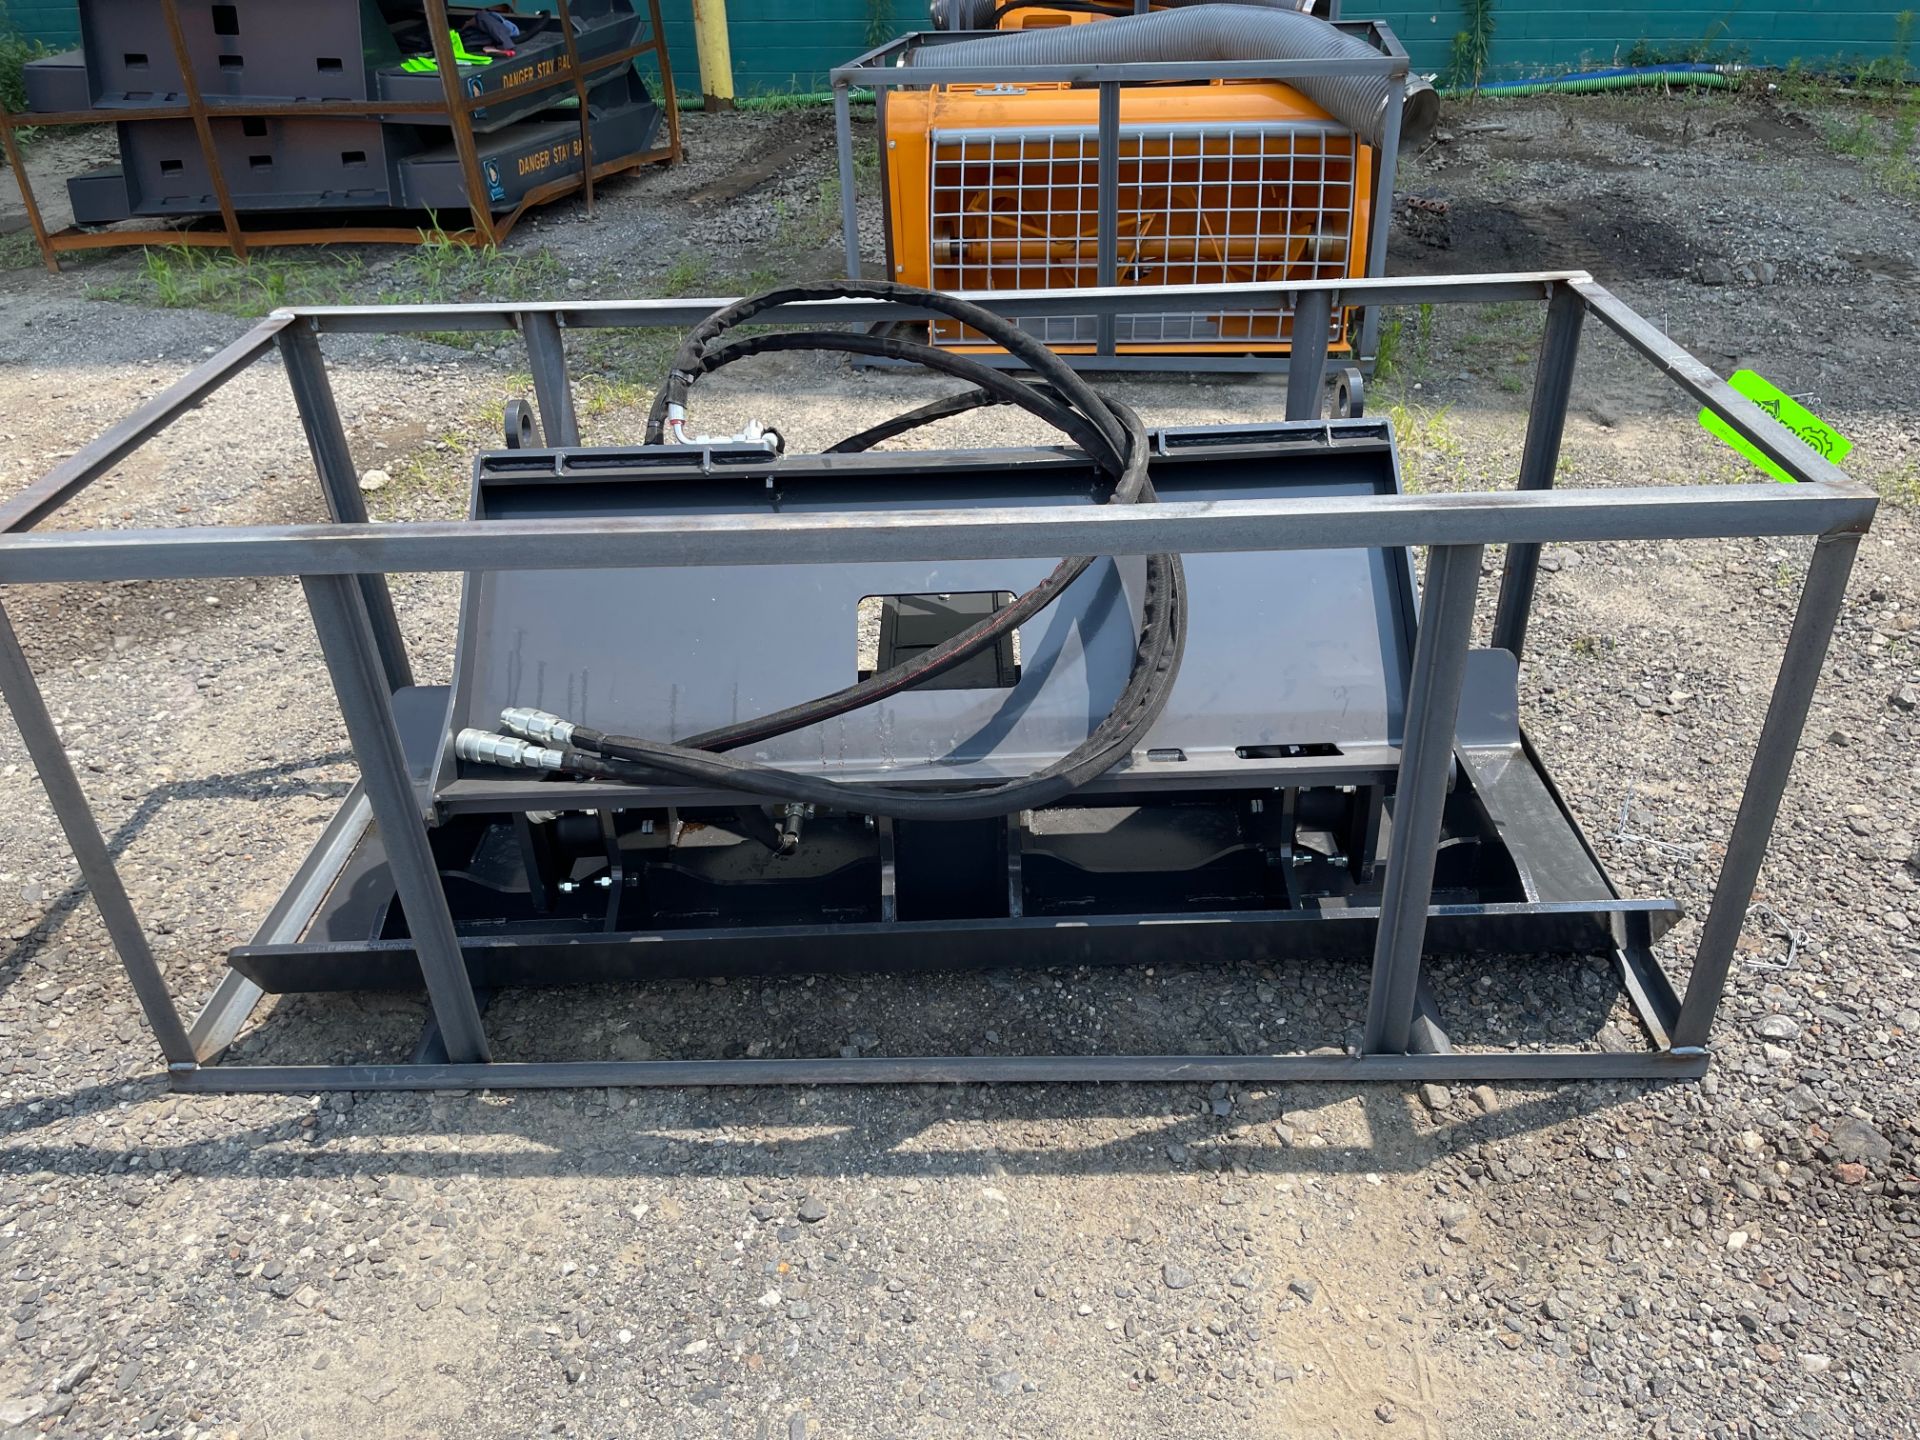 New Skid Steer Vibratory Plate Compactor (b2) - Image 6 of 7